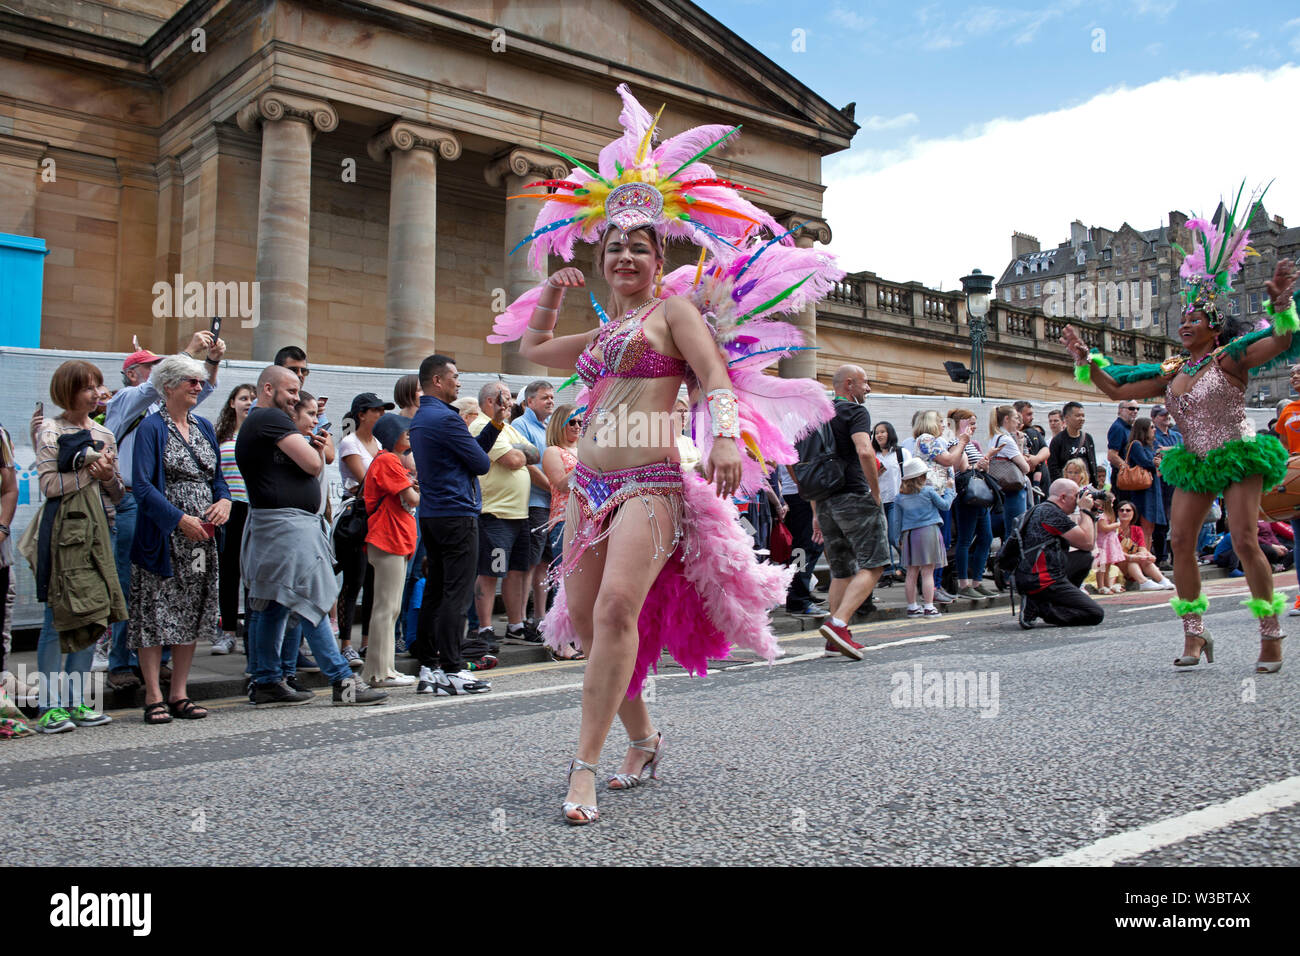 Edinburgh, Scotland, UK.14th July 2019. Edinburgh Festival Carnival 2019. More than 800 performers took part in the colourful parade from the top of The Mound down through Princes Street and into Princes Street Gardens West to continue the party atmosphere with world class music and dance to entertain the crowds who attended and lined the streets. Stock Photo